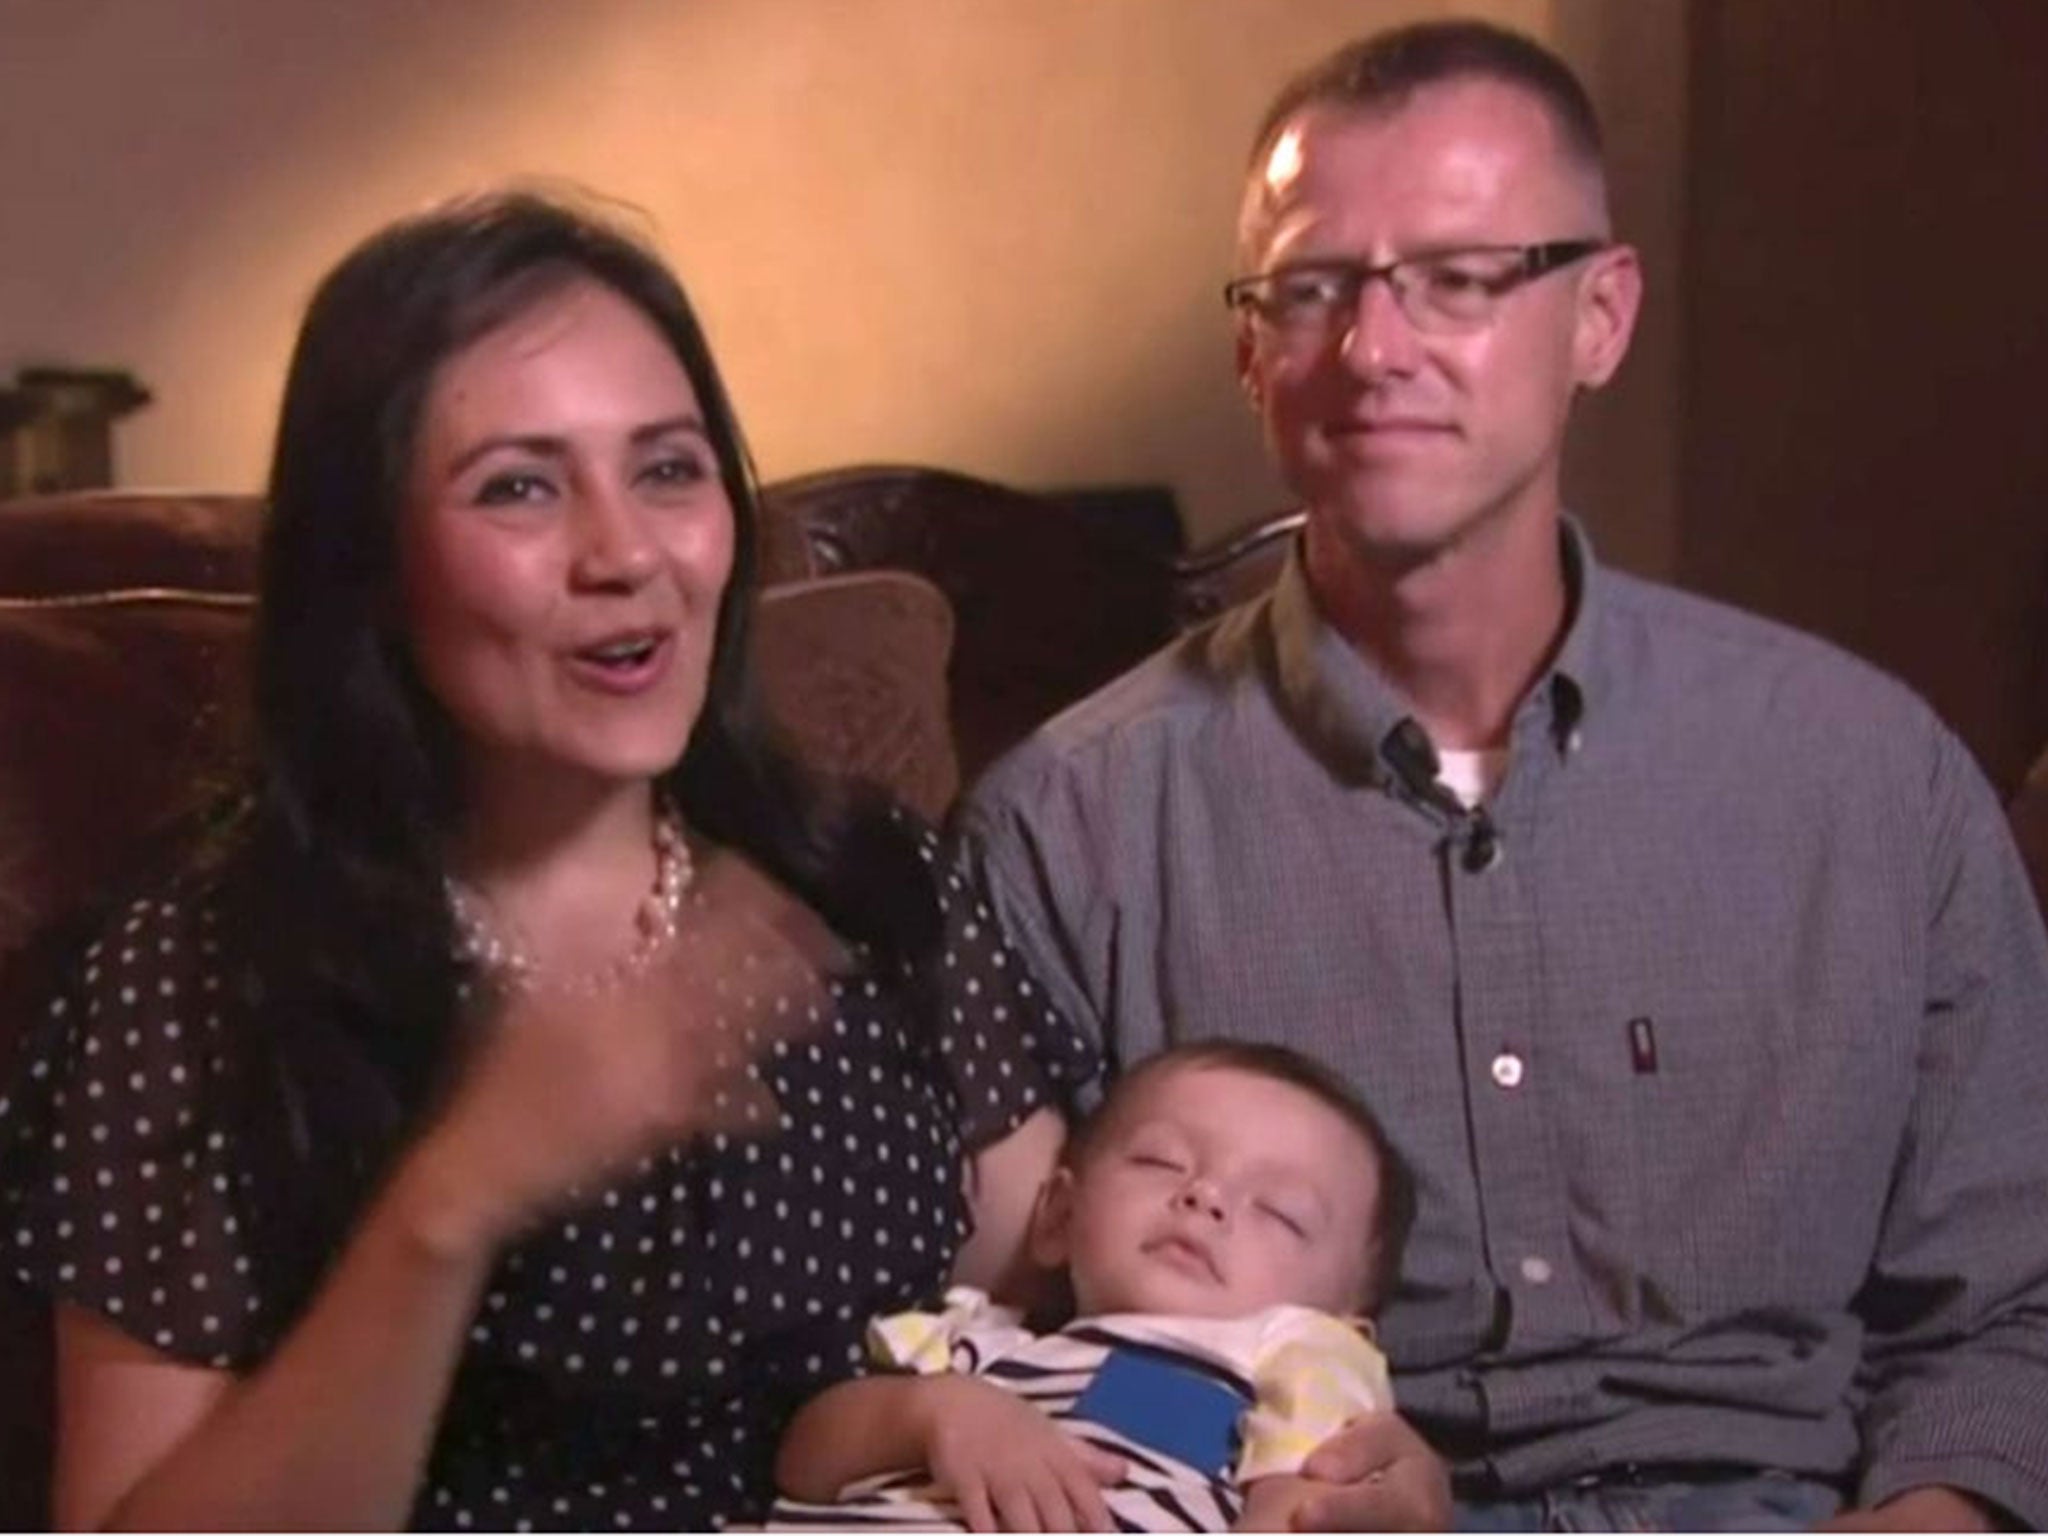 Richard Cushworth and his Salvadoran wife Mercedes Casanellas with their baby son Moses who was originally swapped at birth in El Salvador